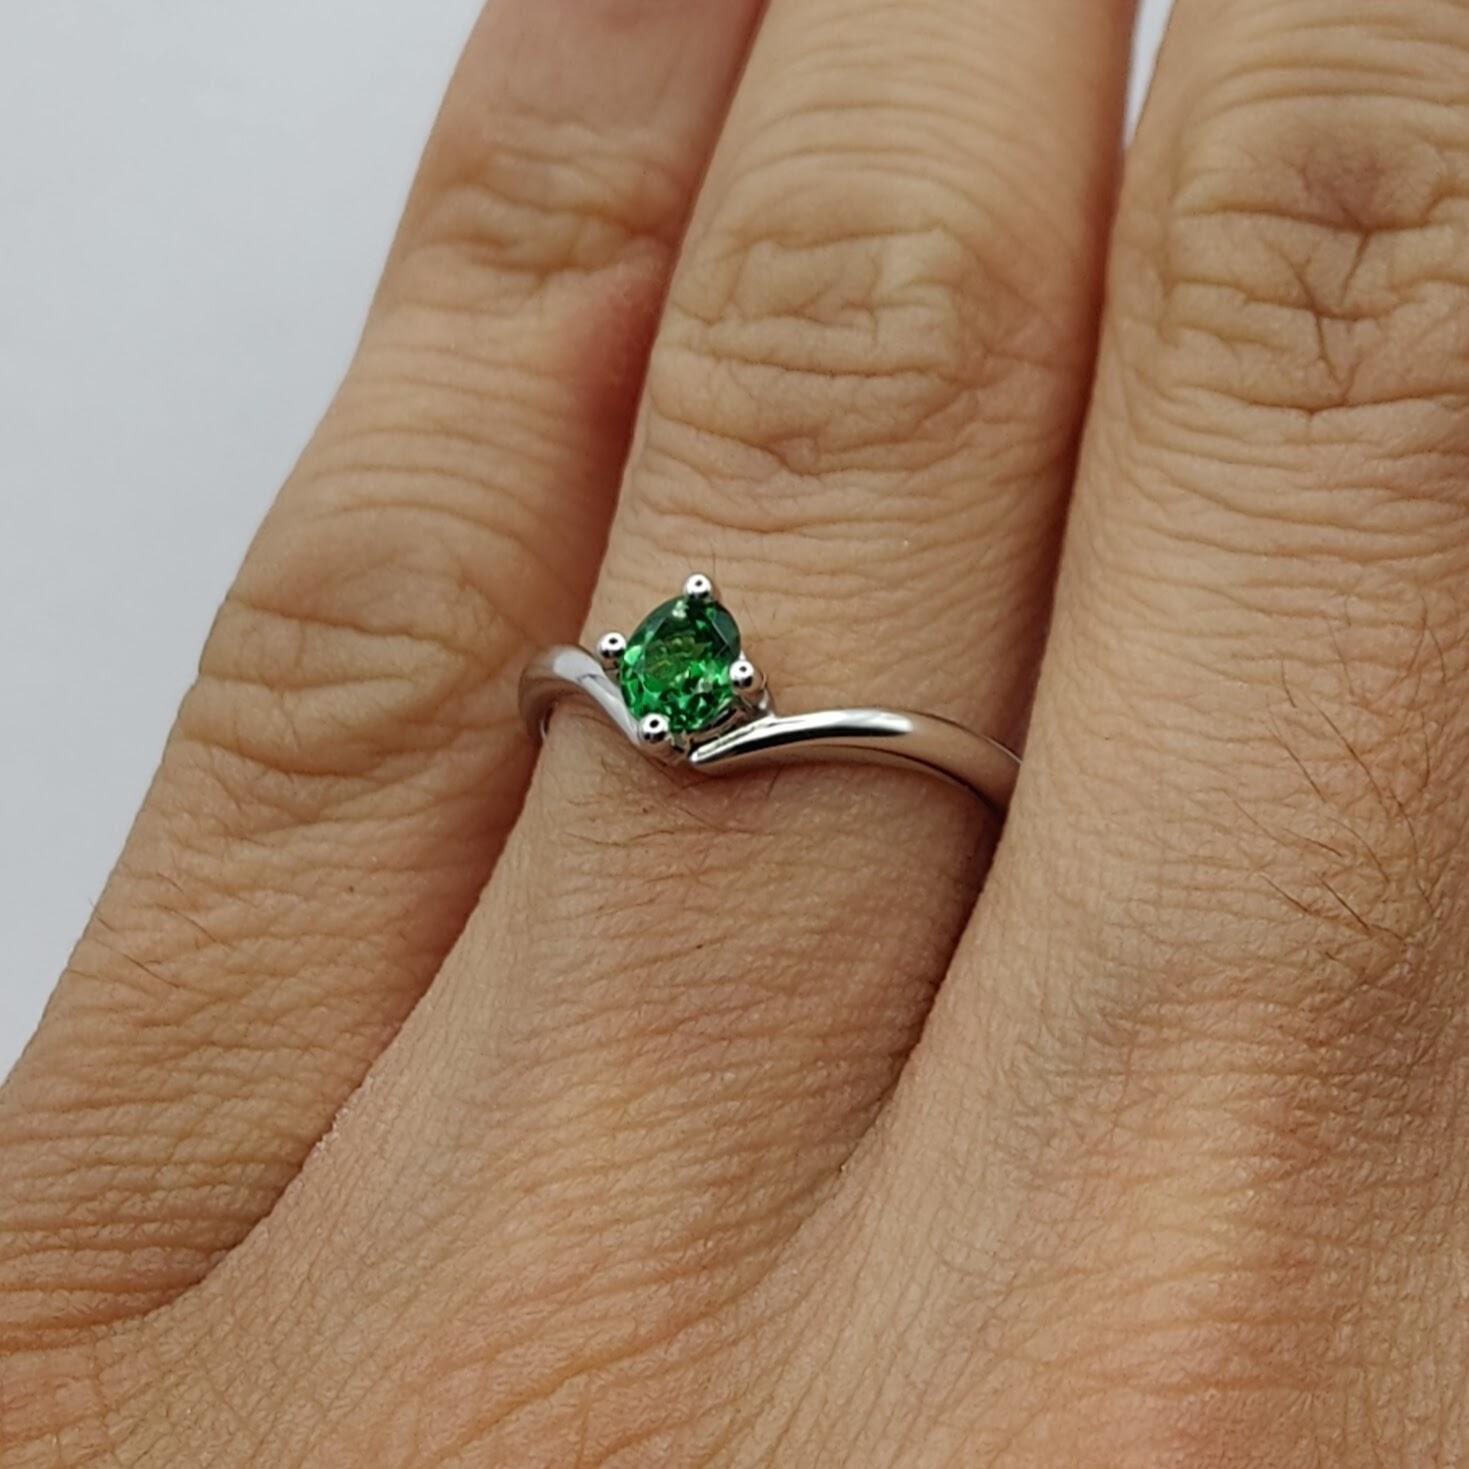 Oval Cut Emerald 4-Prong Solitaire Ring in 18k White Gold For Sale 11